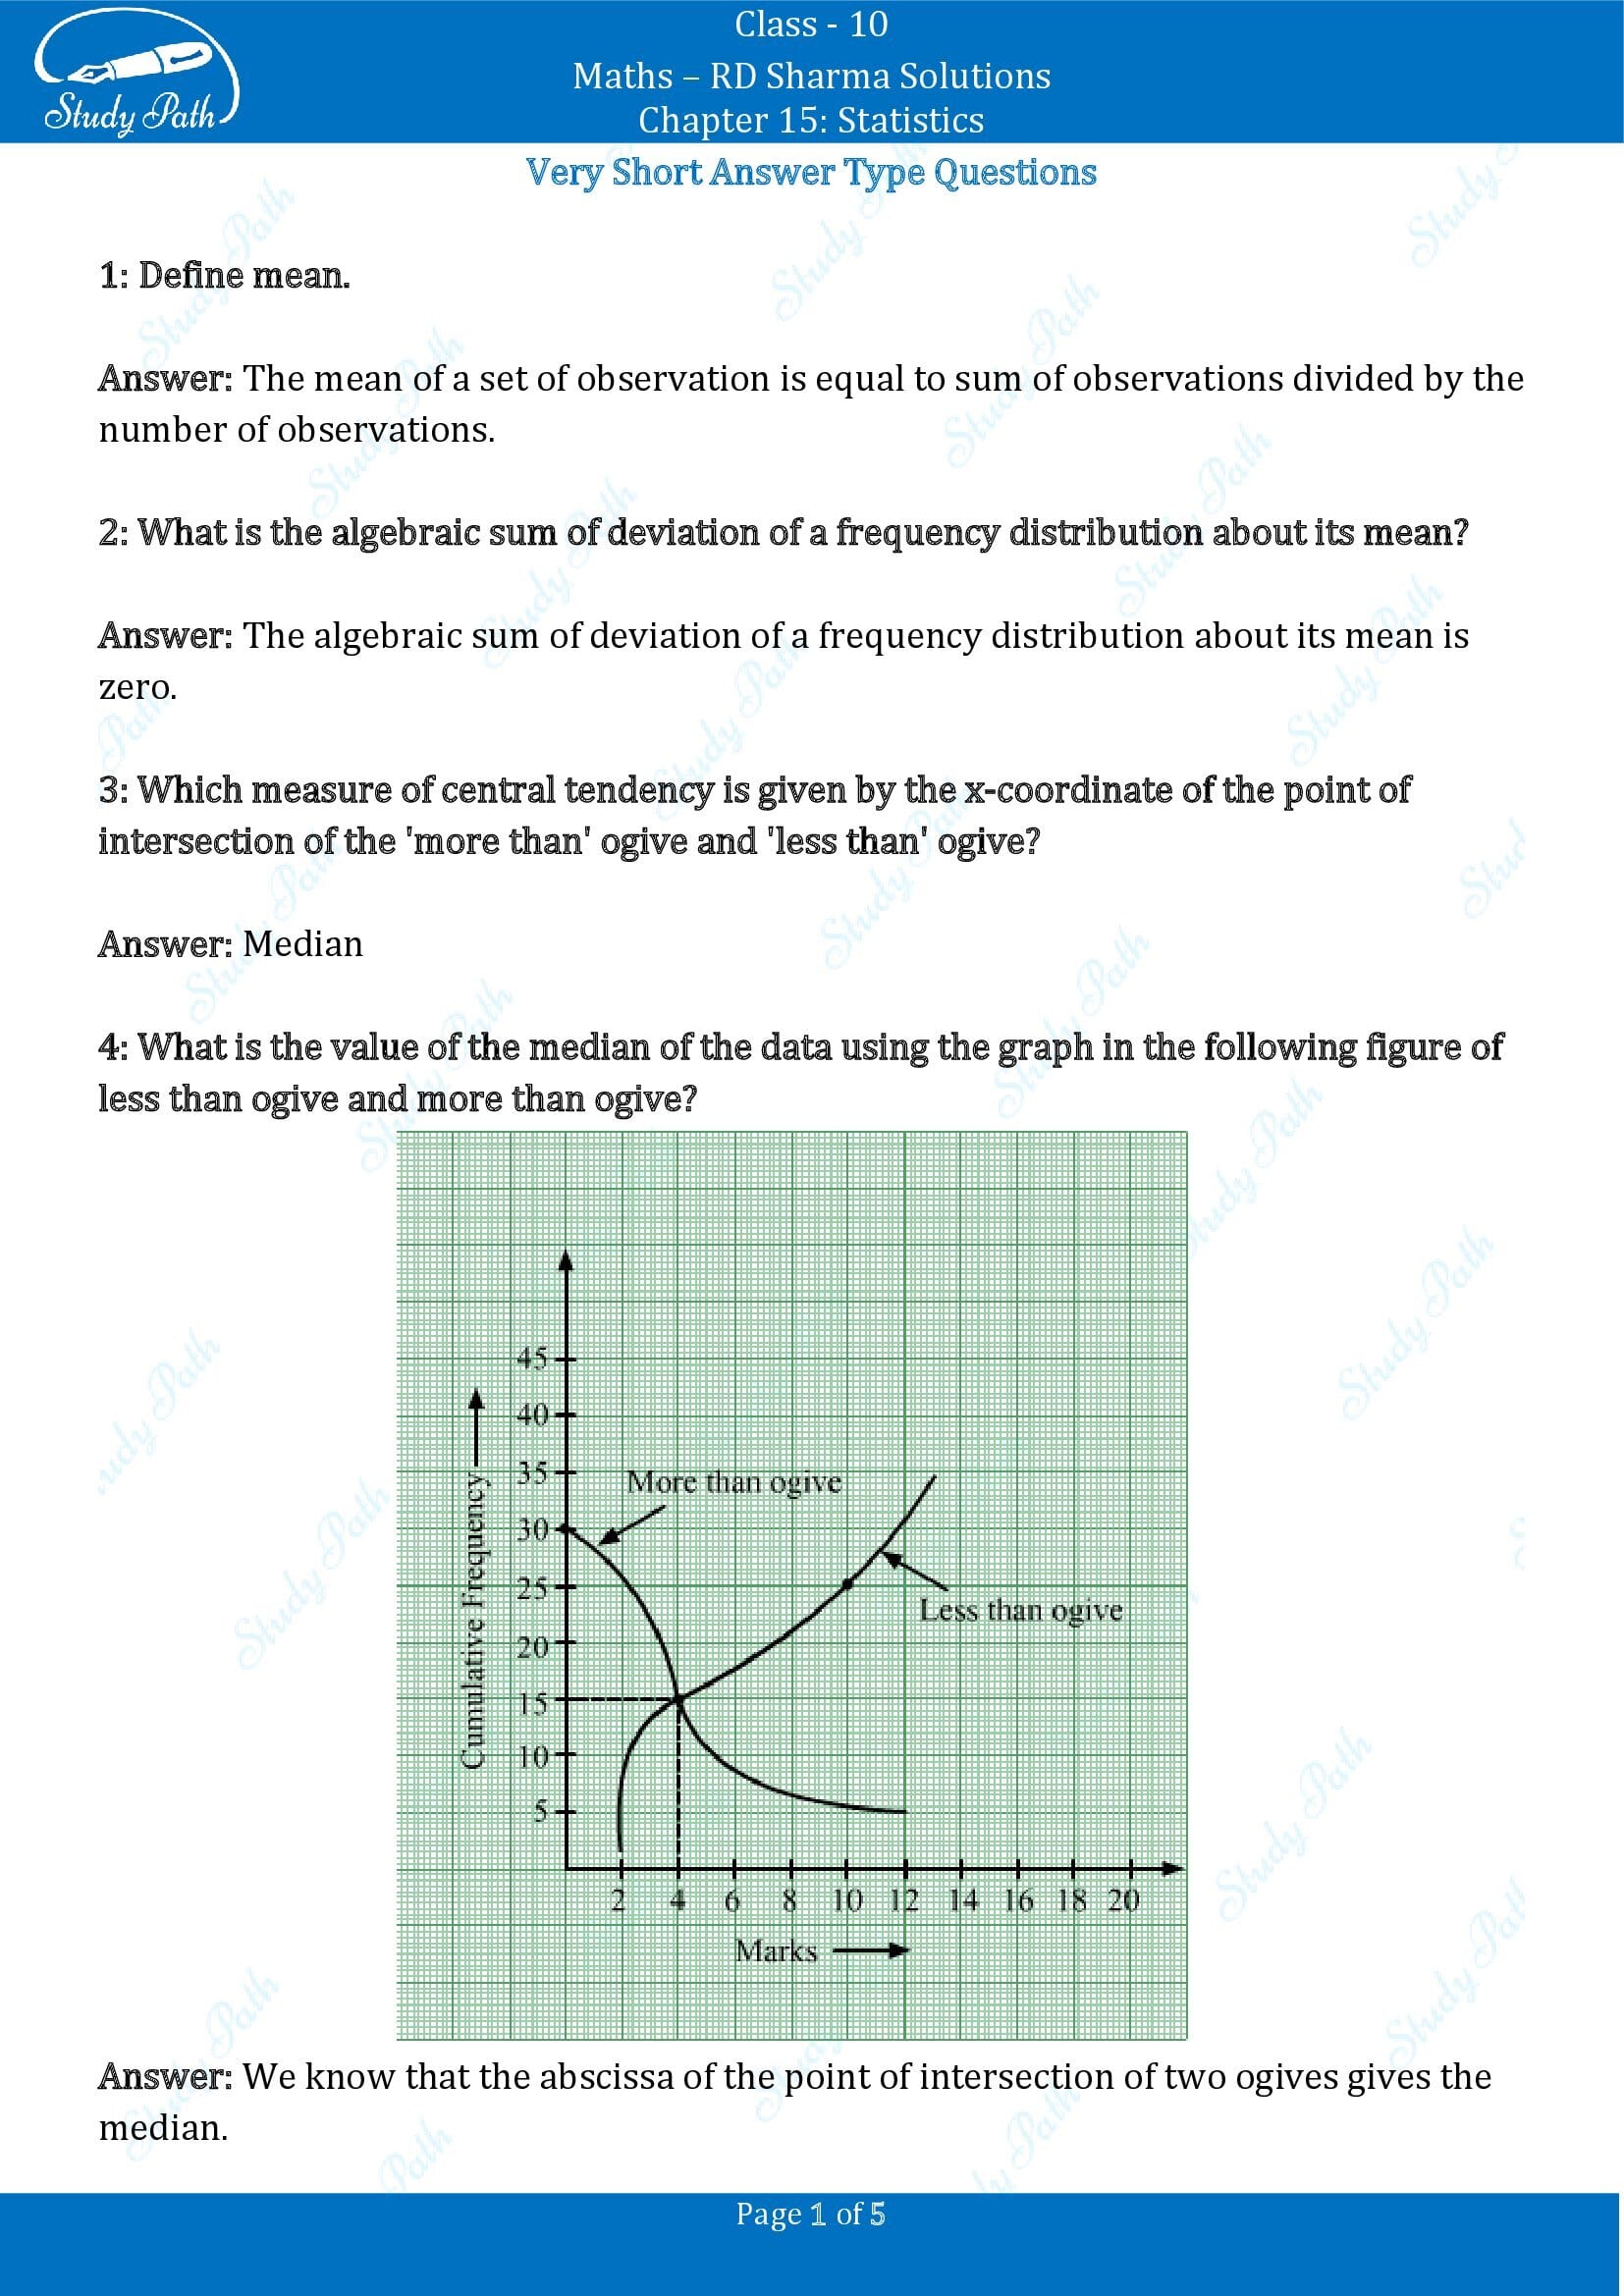 RD Sharma Solutions Class 10 Chapter 15 Statistics Very Short Answer Type Questions VSAQs 00001